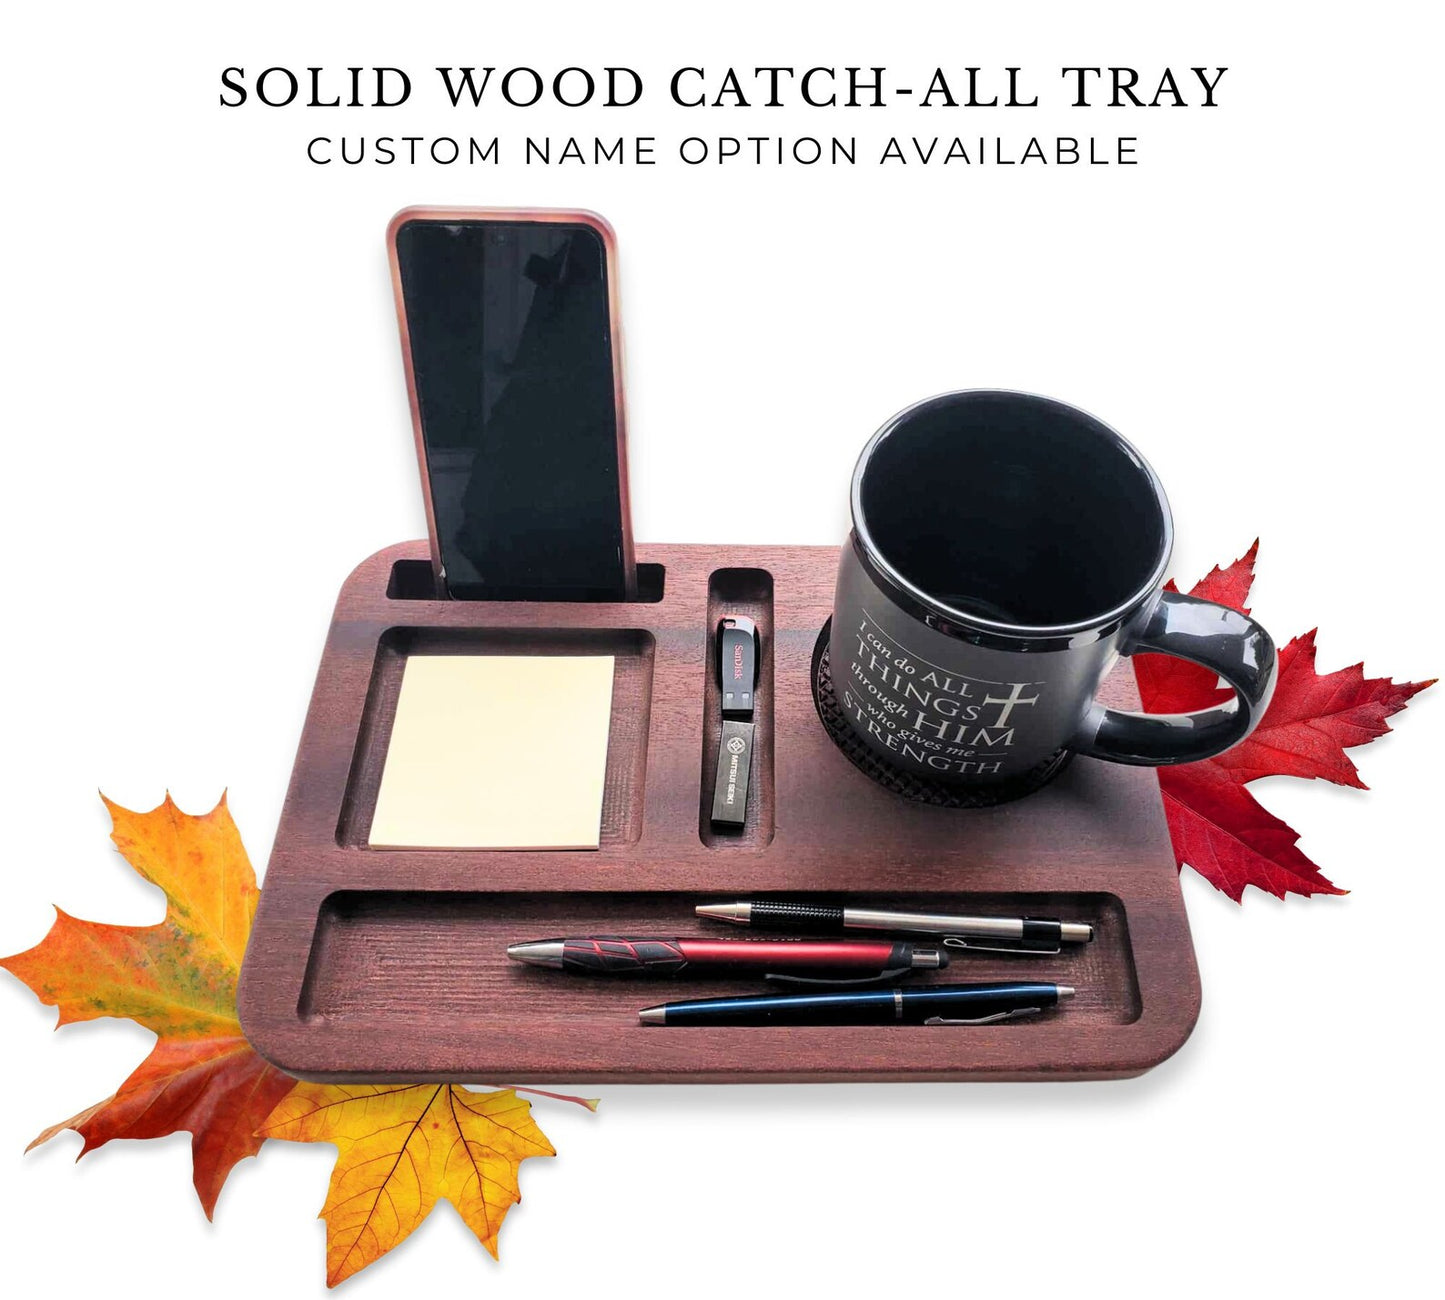 Solid Wood Catch-All Tray | Custom Name Available